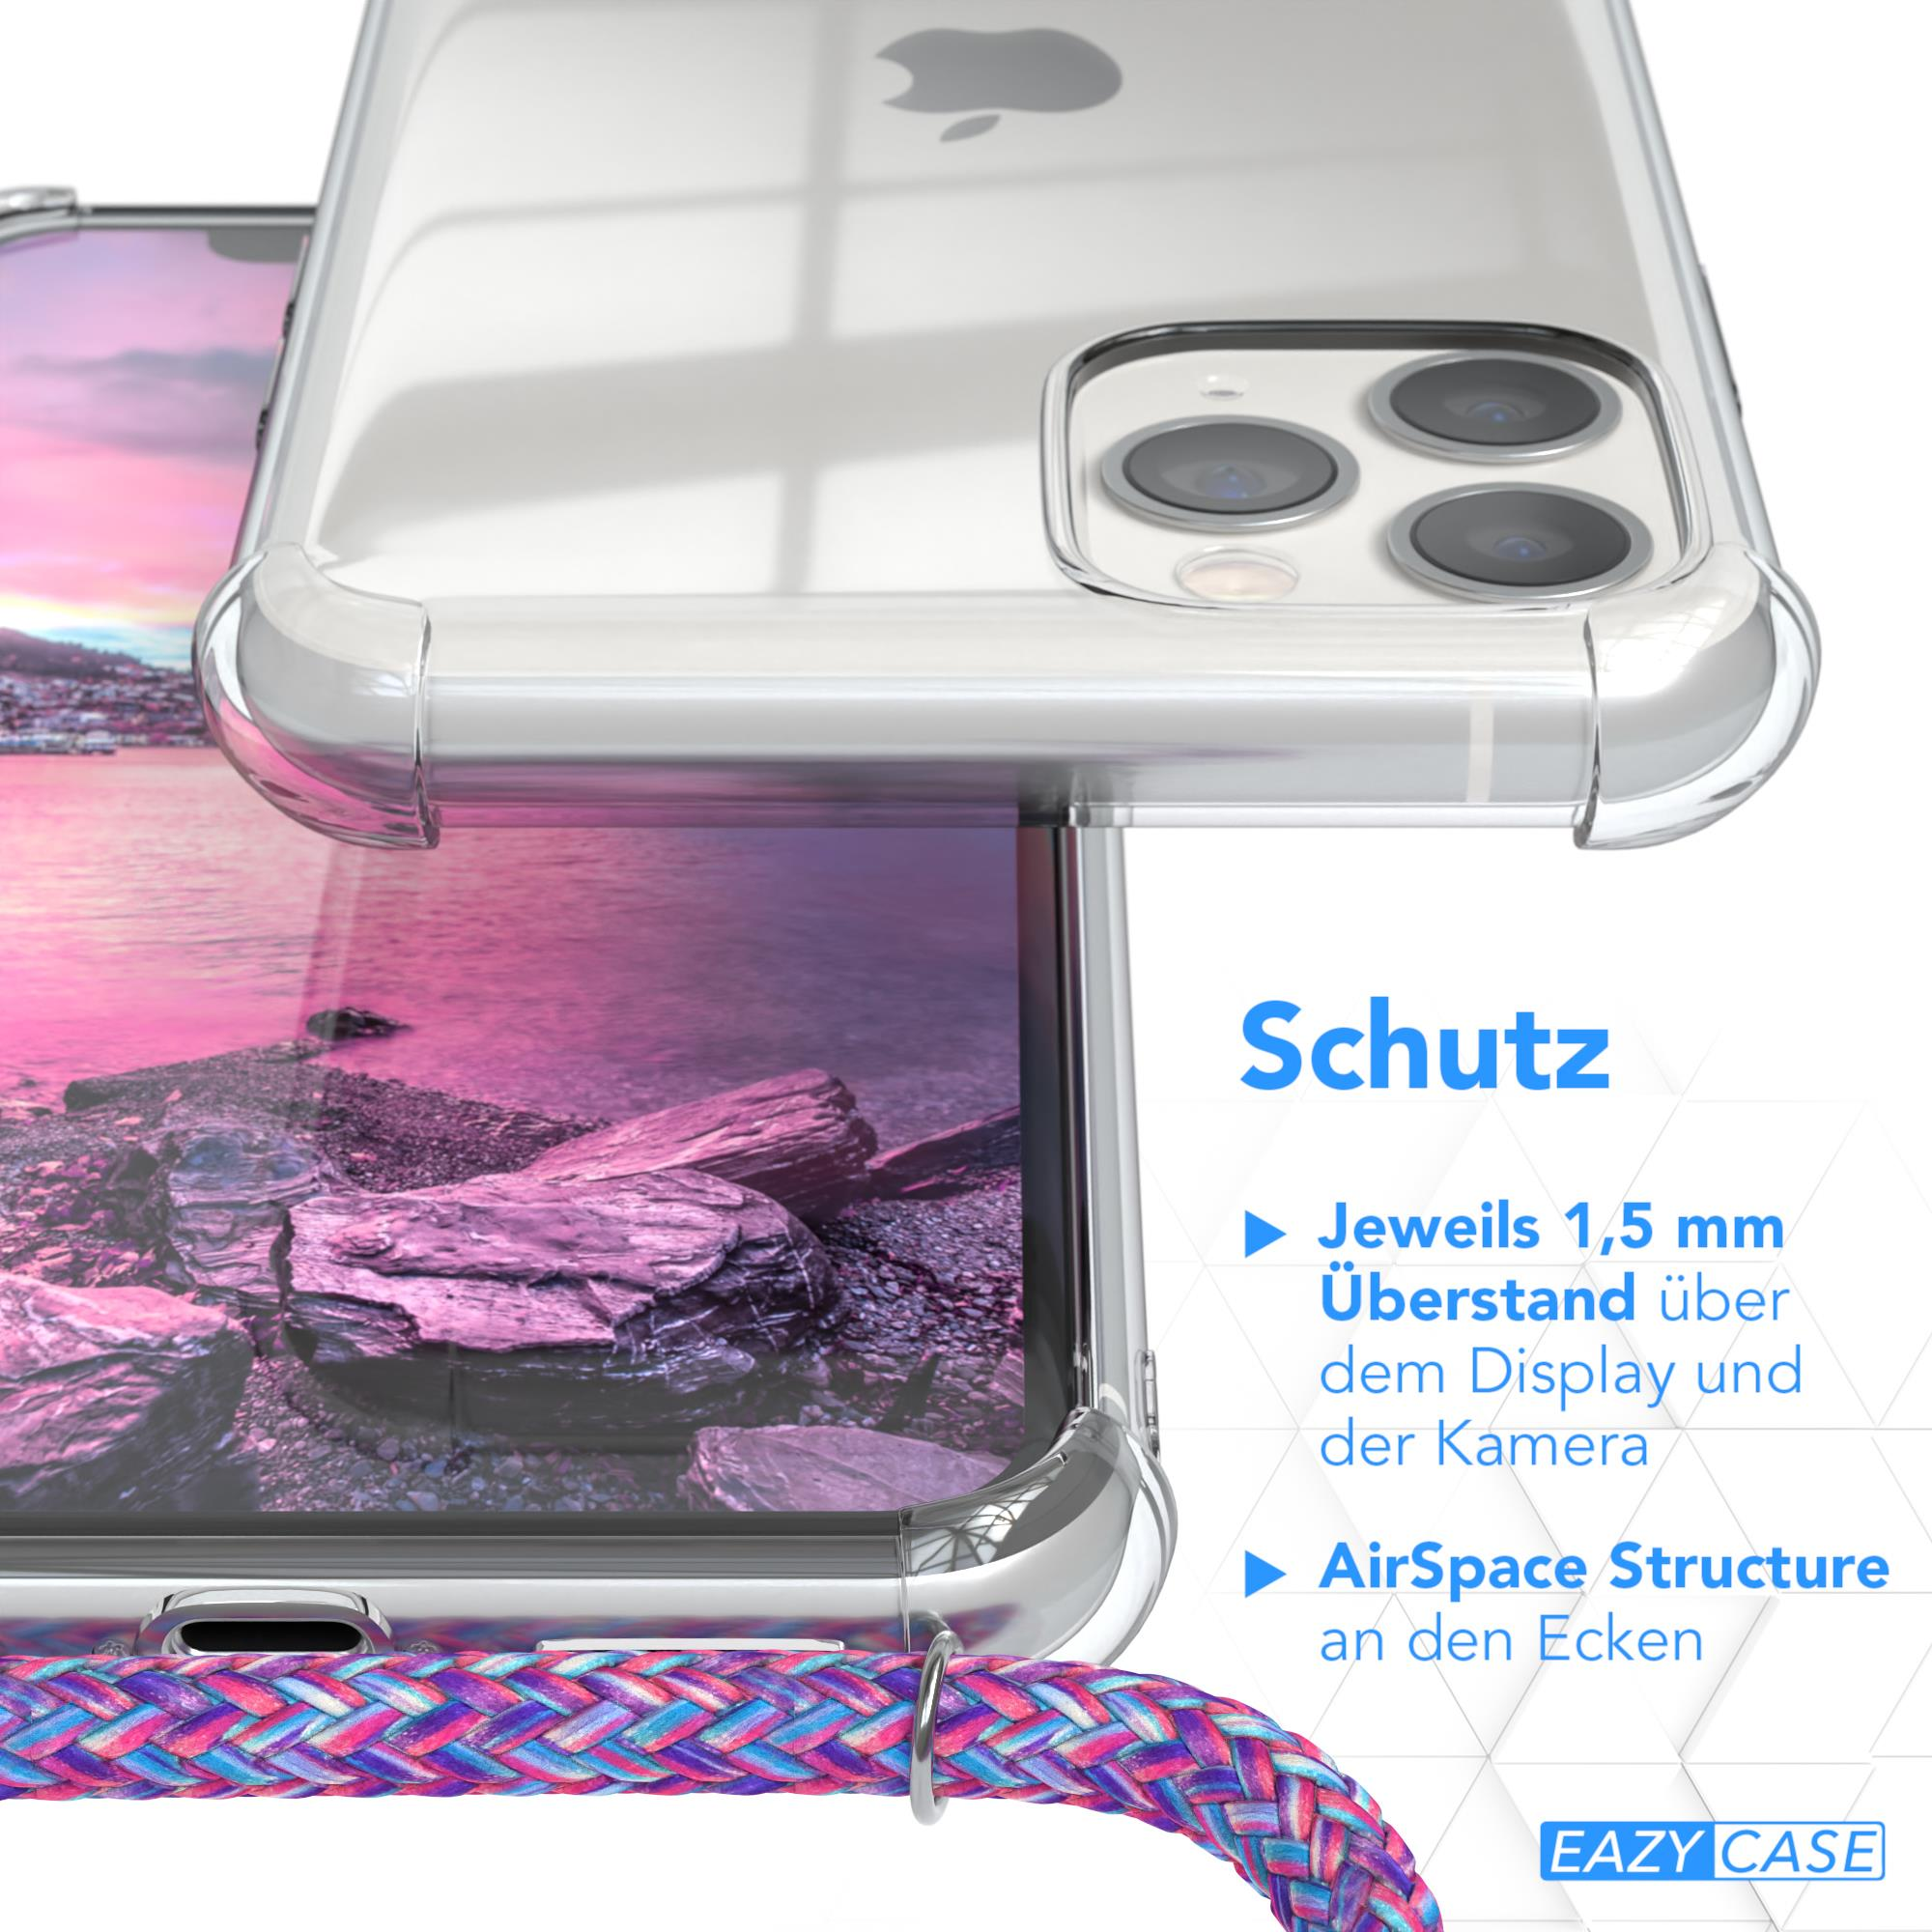 EAZY CASE Clear Cover mit Umhängeband, iPhone 11 Pro, Apple, Silber / Clips Umhängetasche, Lila